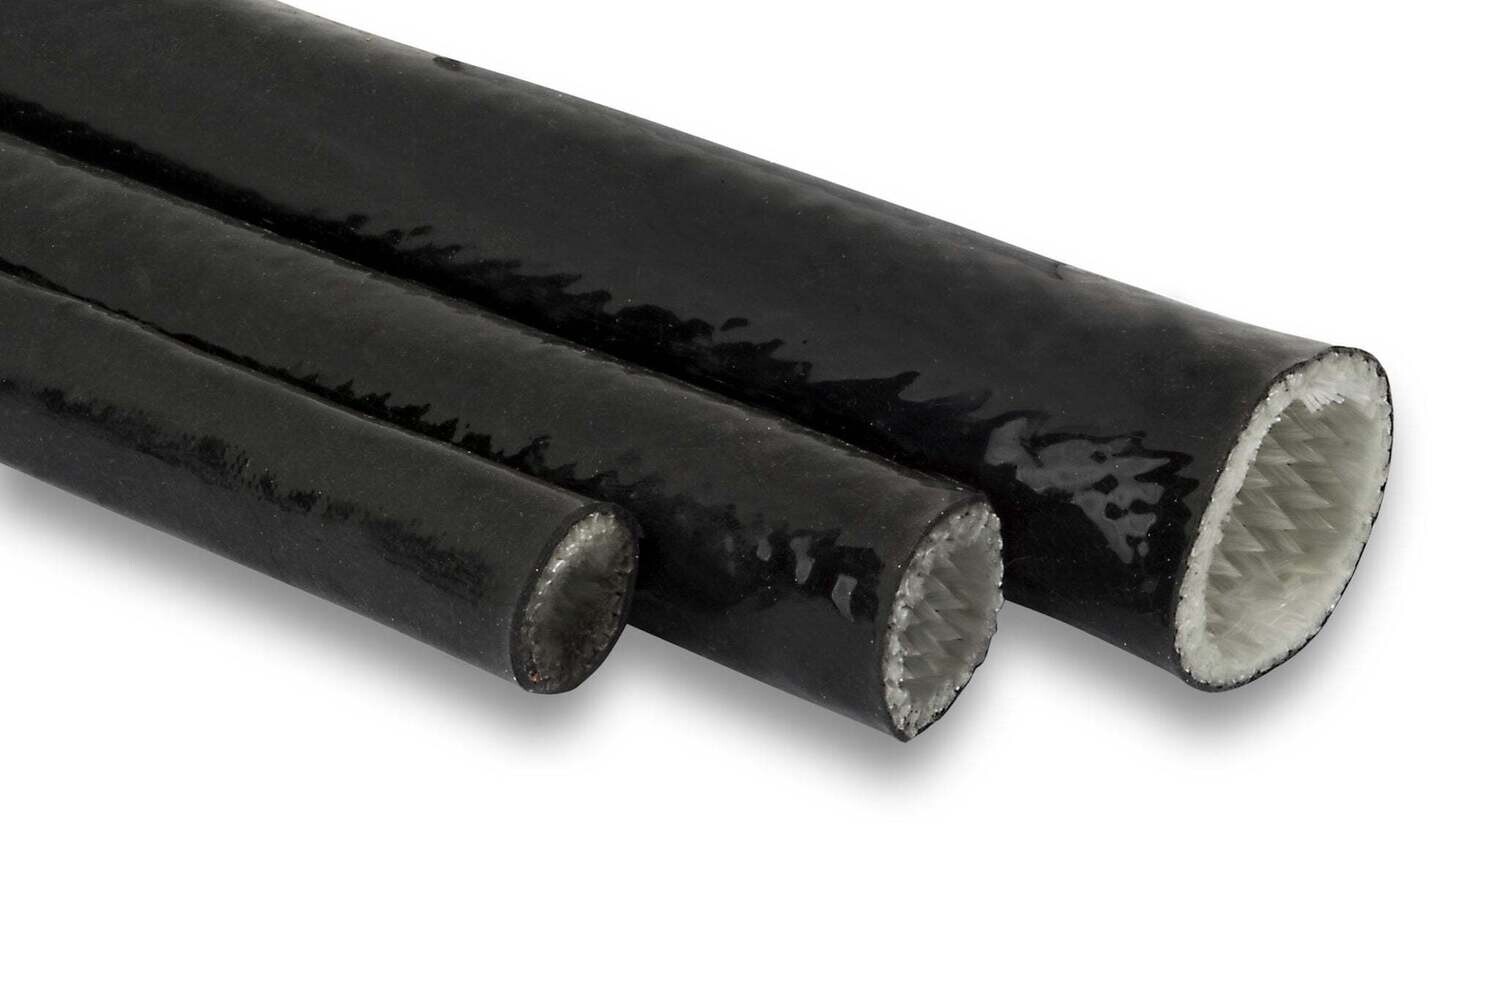 Black Silicon High Heat Sleeve - AN10 (Utilises 20mm Sleeving), 2.0m Multiple Qty will come on a continuous Roll